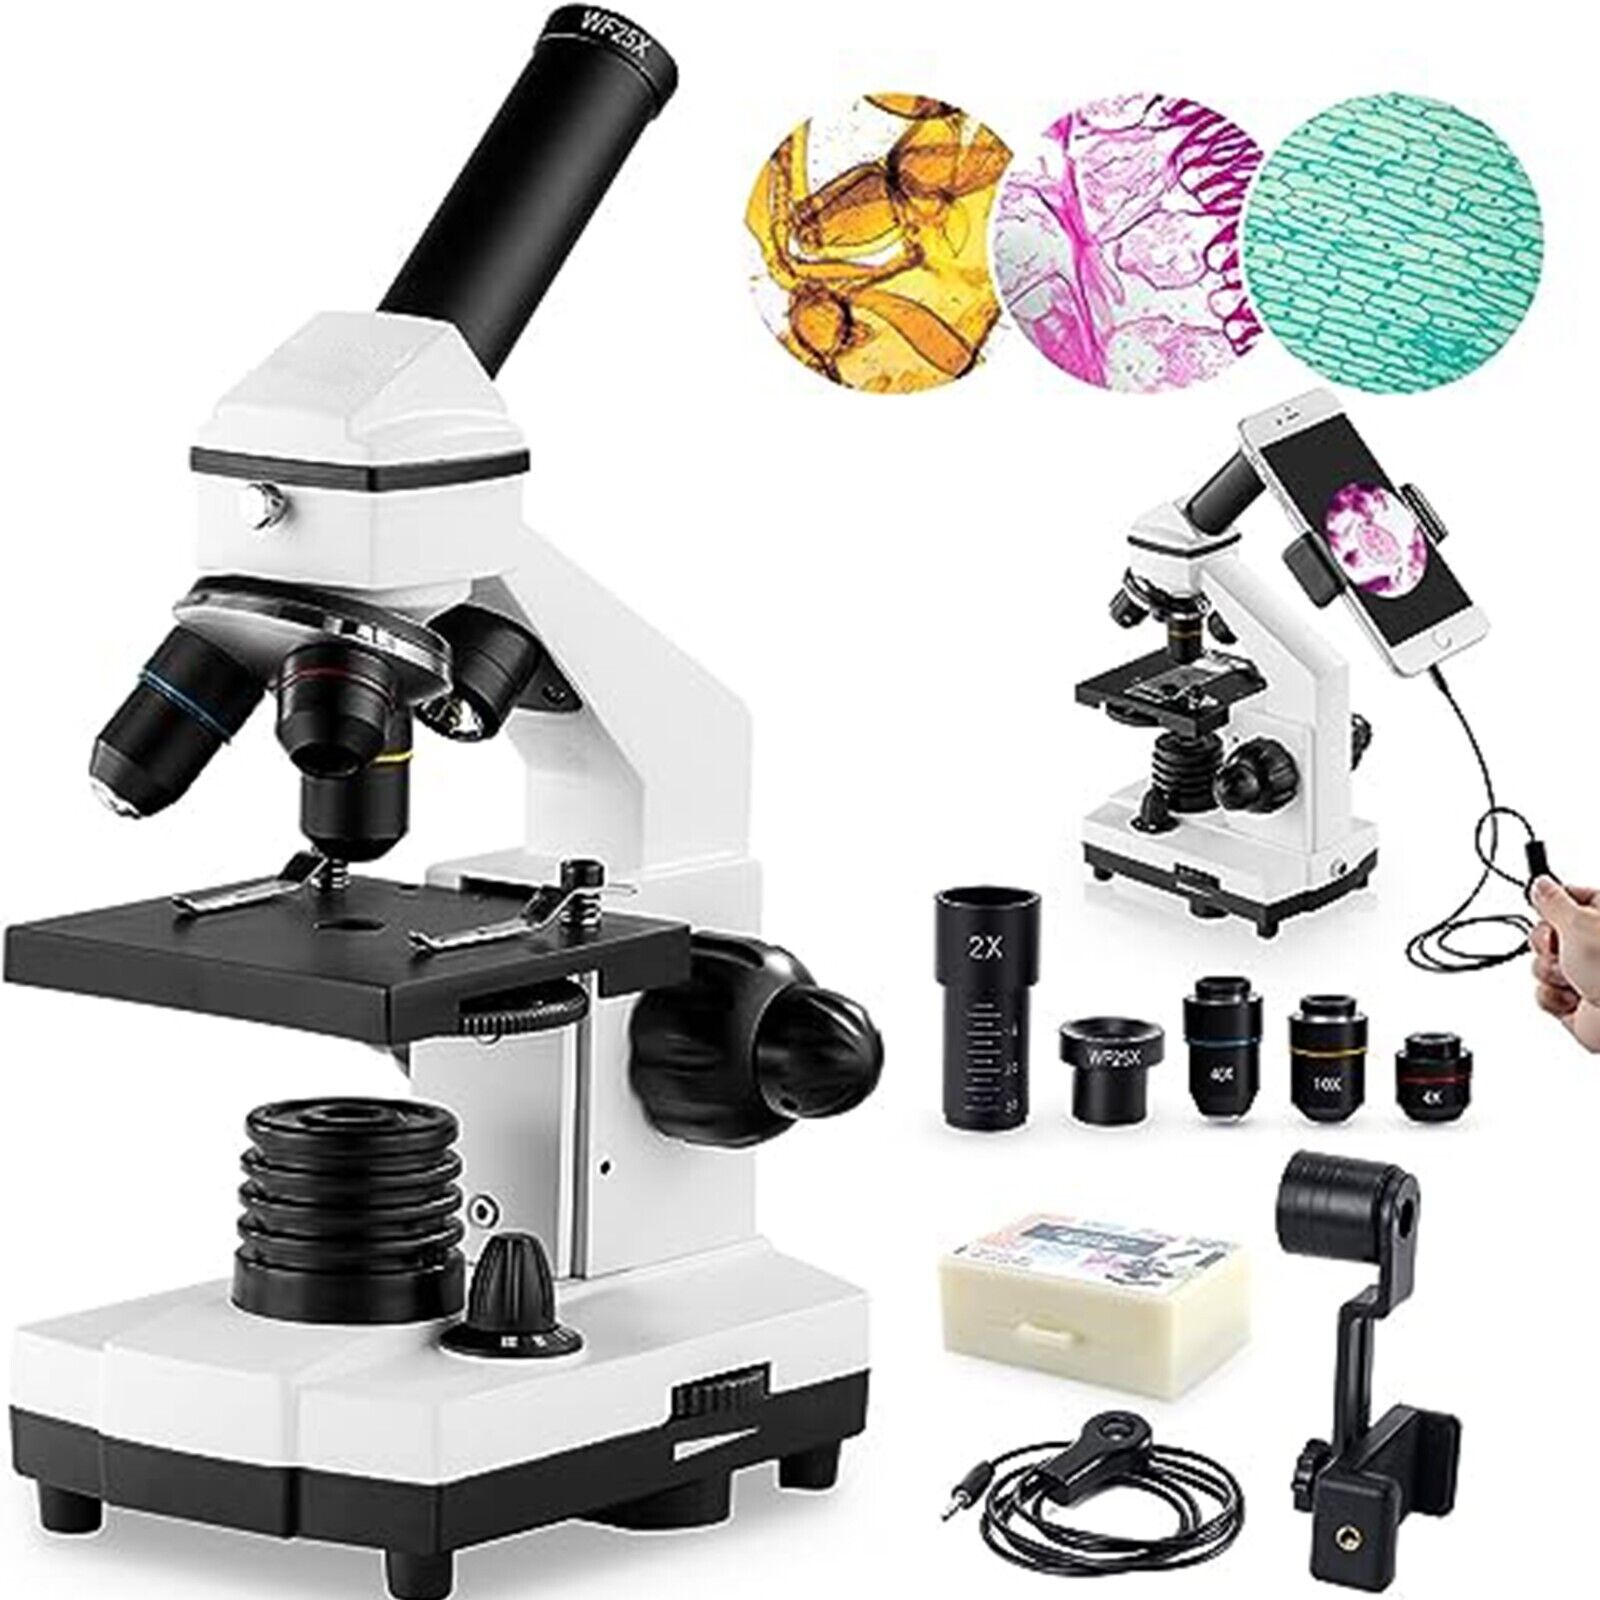 Microscope for Adults Kids, 100X-2000X BEBANG Compound Microscope with Microscop